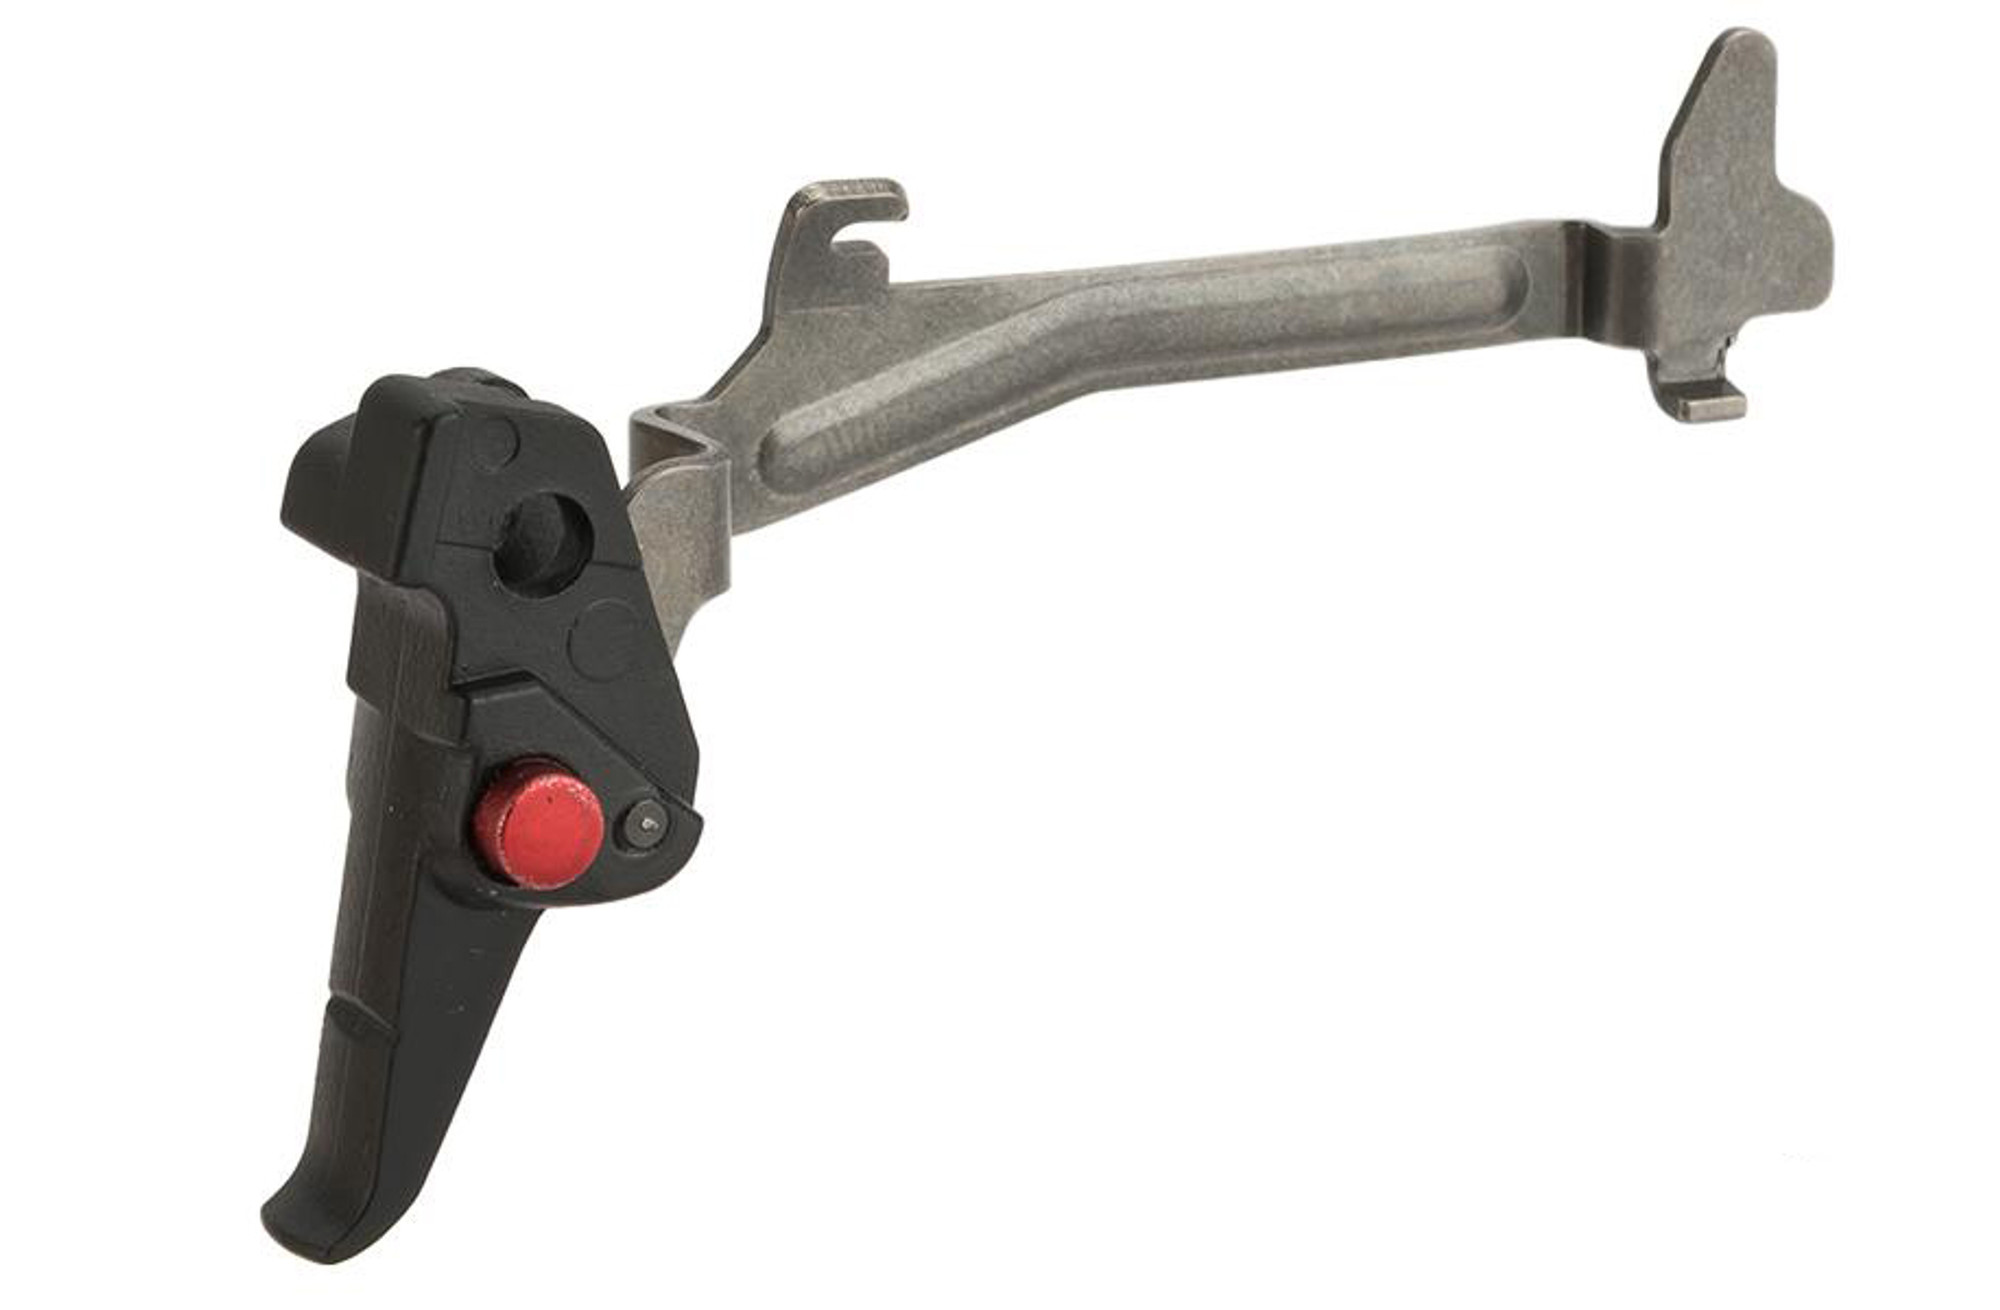 APS "ZERO" Competition Style Trigger with Integrated Push-Through Safety for ACP / CAP Airsoft Pistols - Black